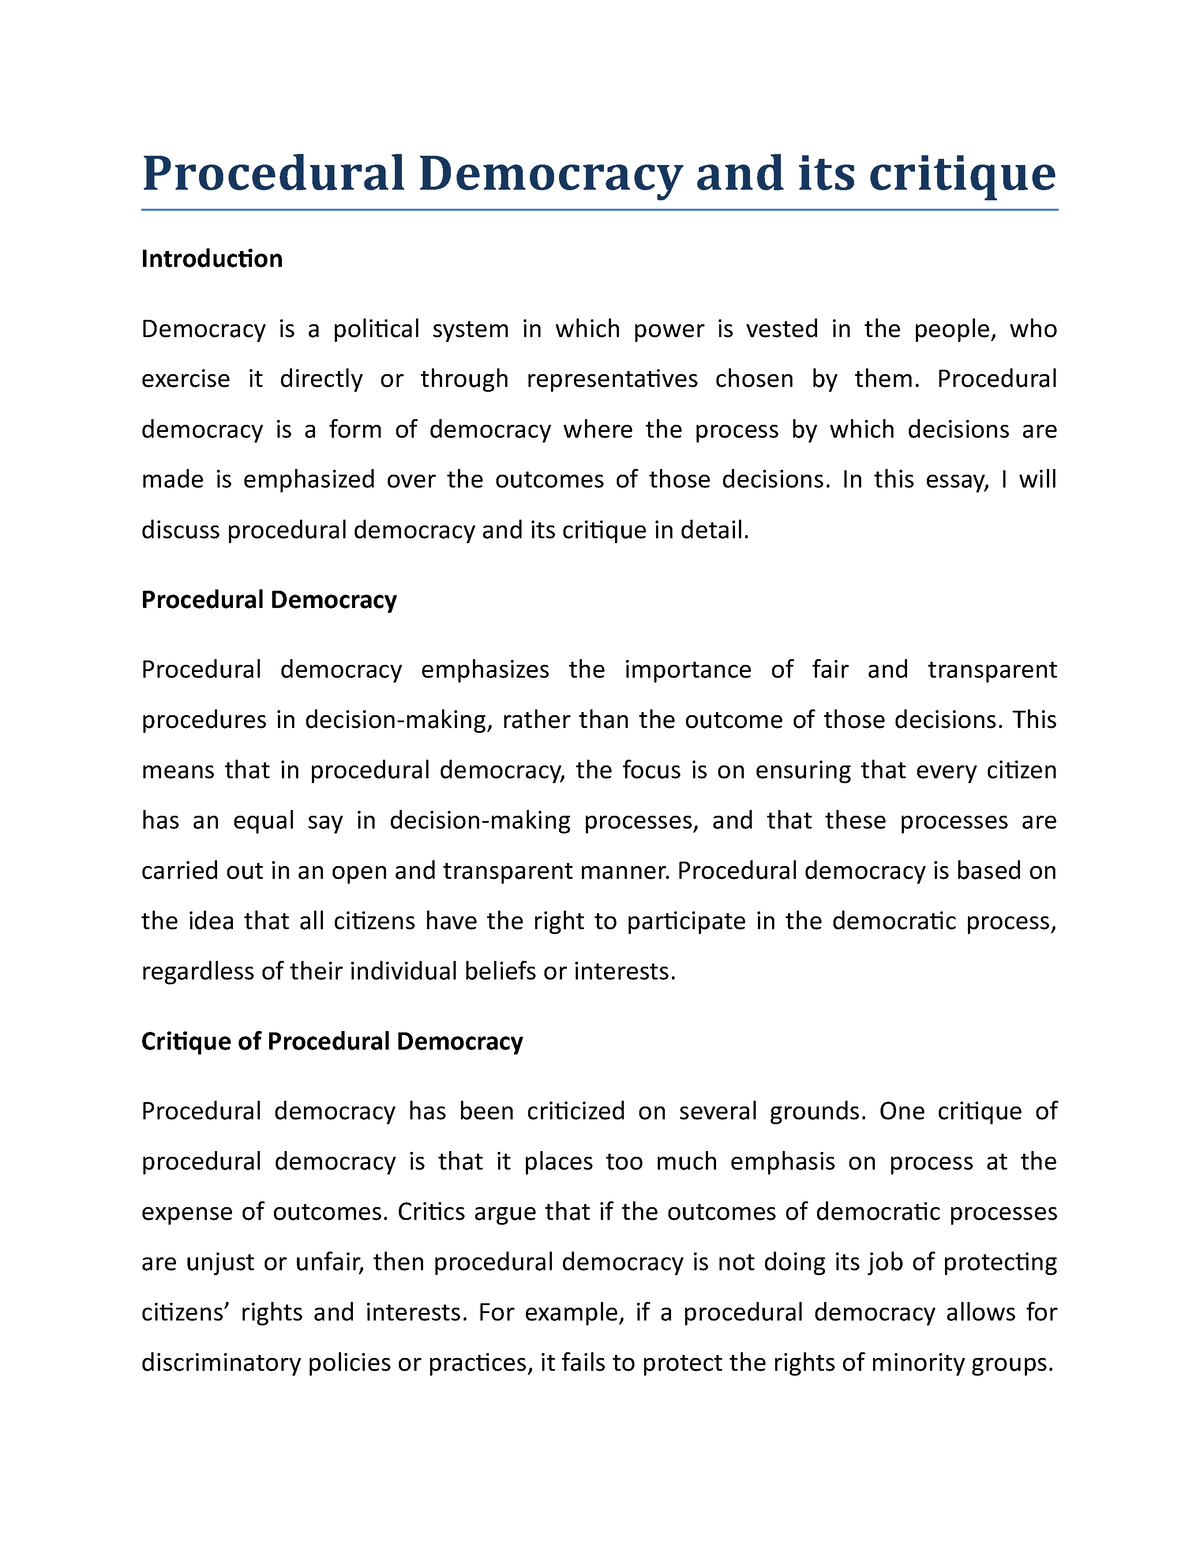 write an essay on procedural and substantive democracy pdf